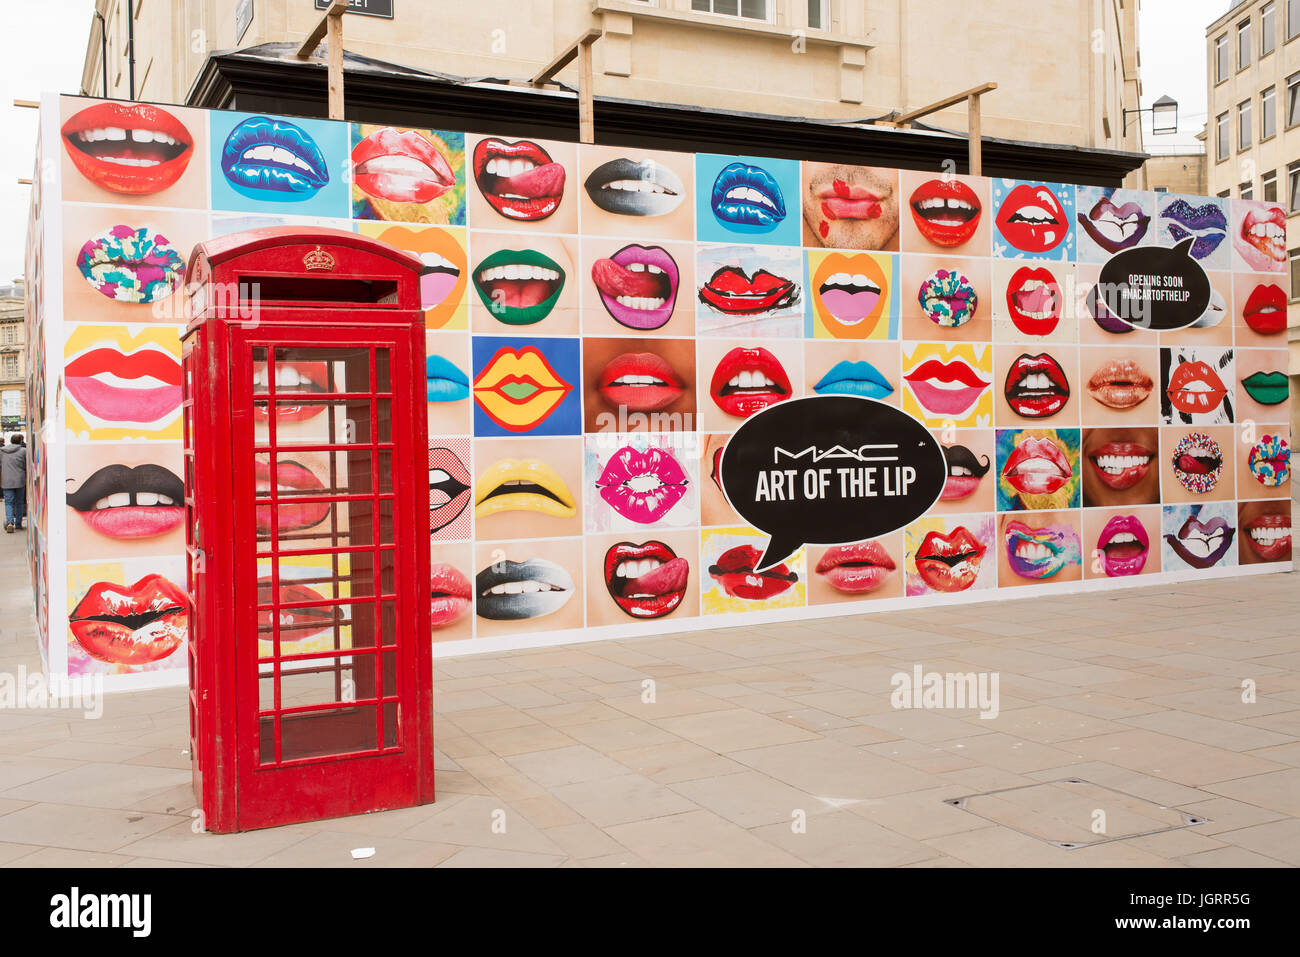 Big billboard on UK high street full of mouths with lipstick next to a red phone booth advertising MAC Cosmetics, stylized as M·A·C, a cosmetics manuf Stock Photo